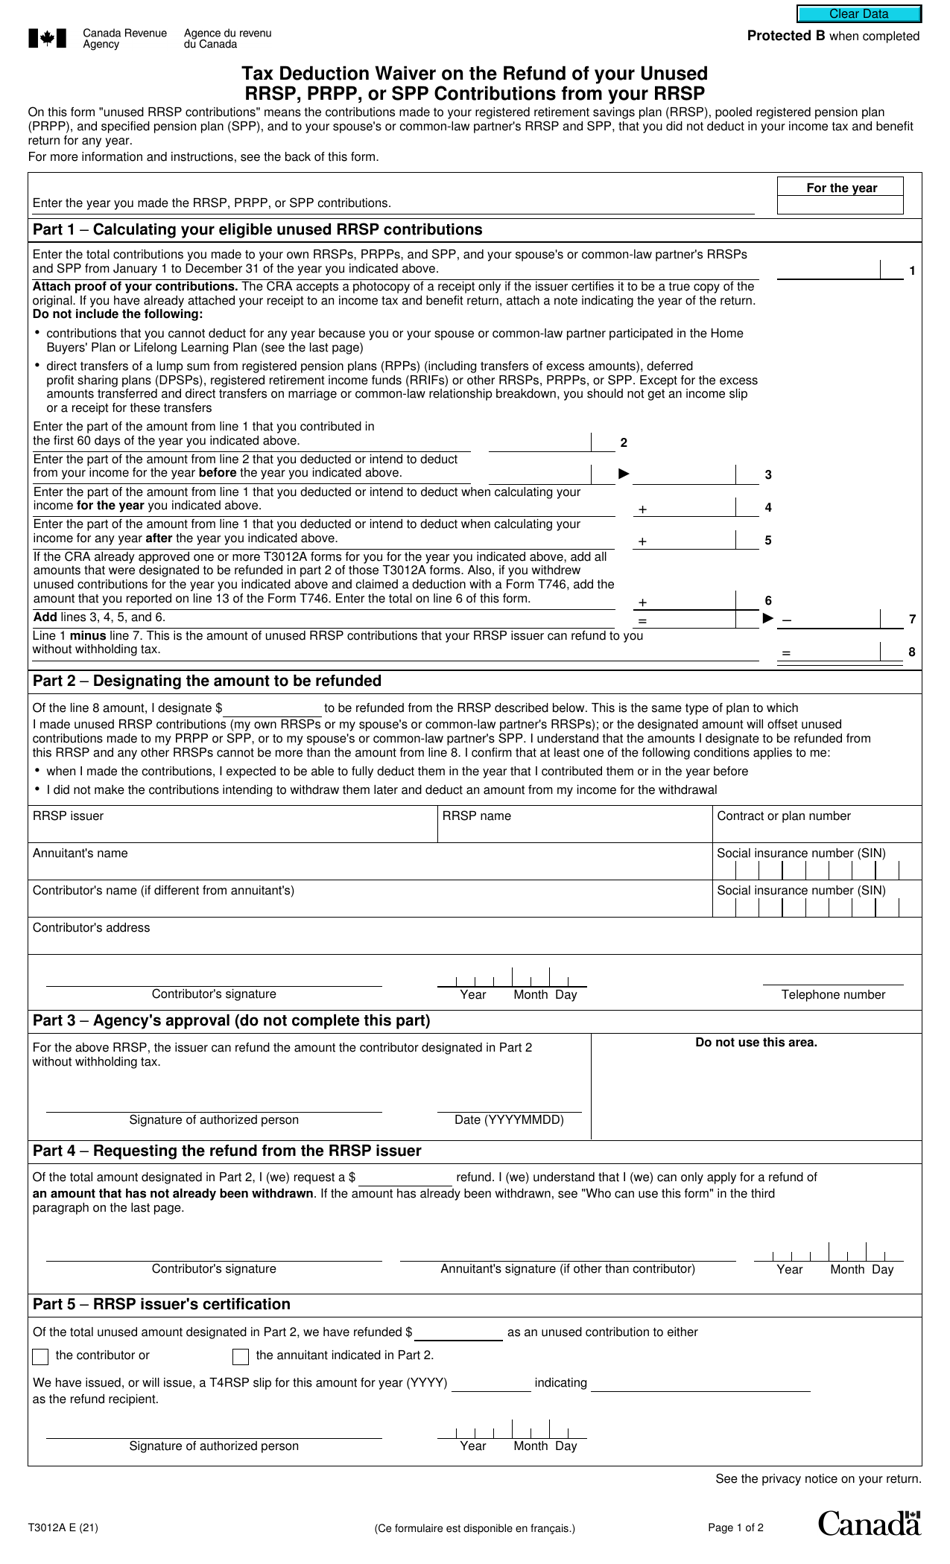 Form T3012A Tax Deduction Waiver on the Refund of Your Unused Rrsp, Prpp, or Spp Contributions From Your Rrsp - Canada, Page 1